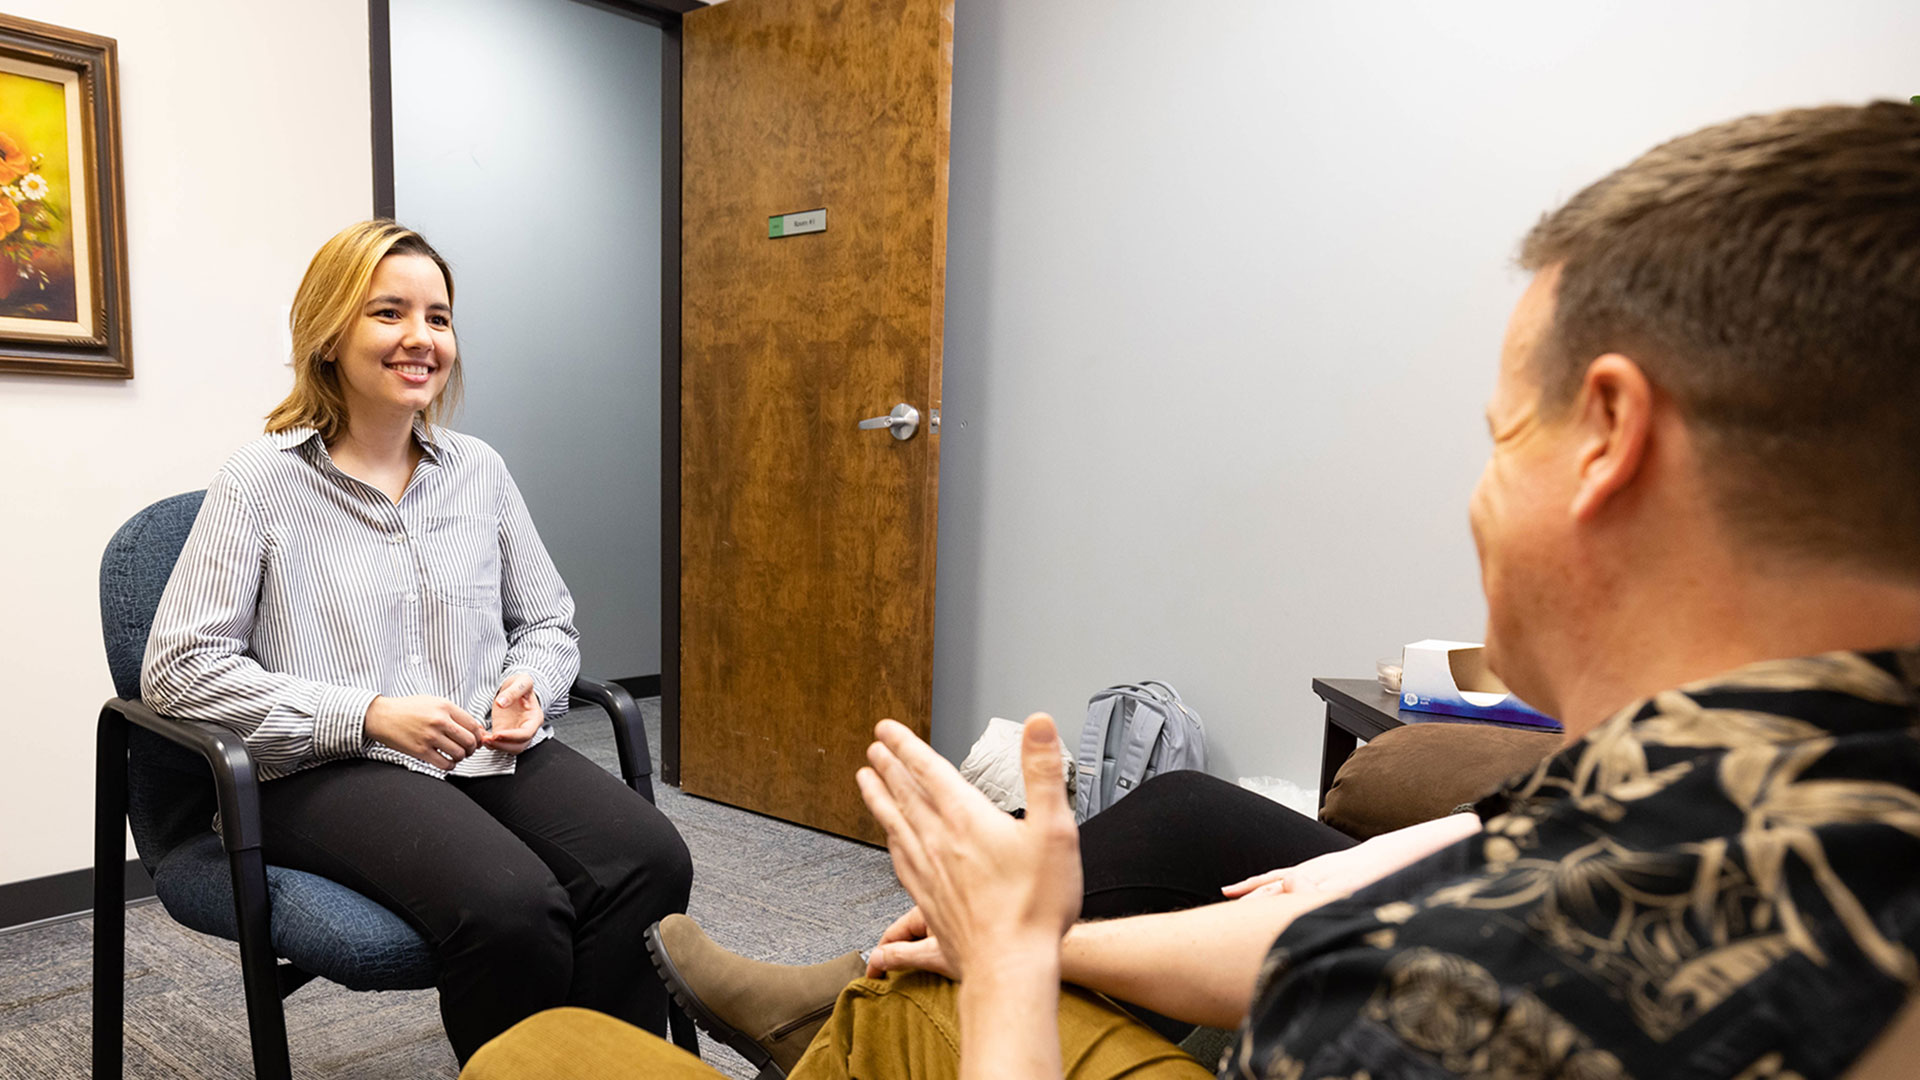 A student leads a counseling session as she attentively listens to her clients.